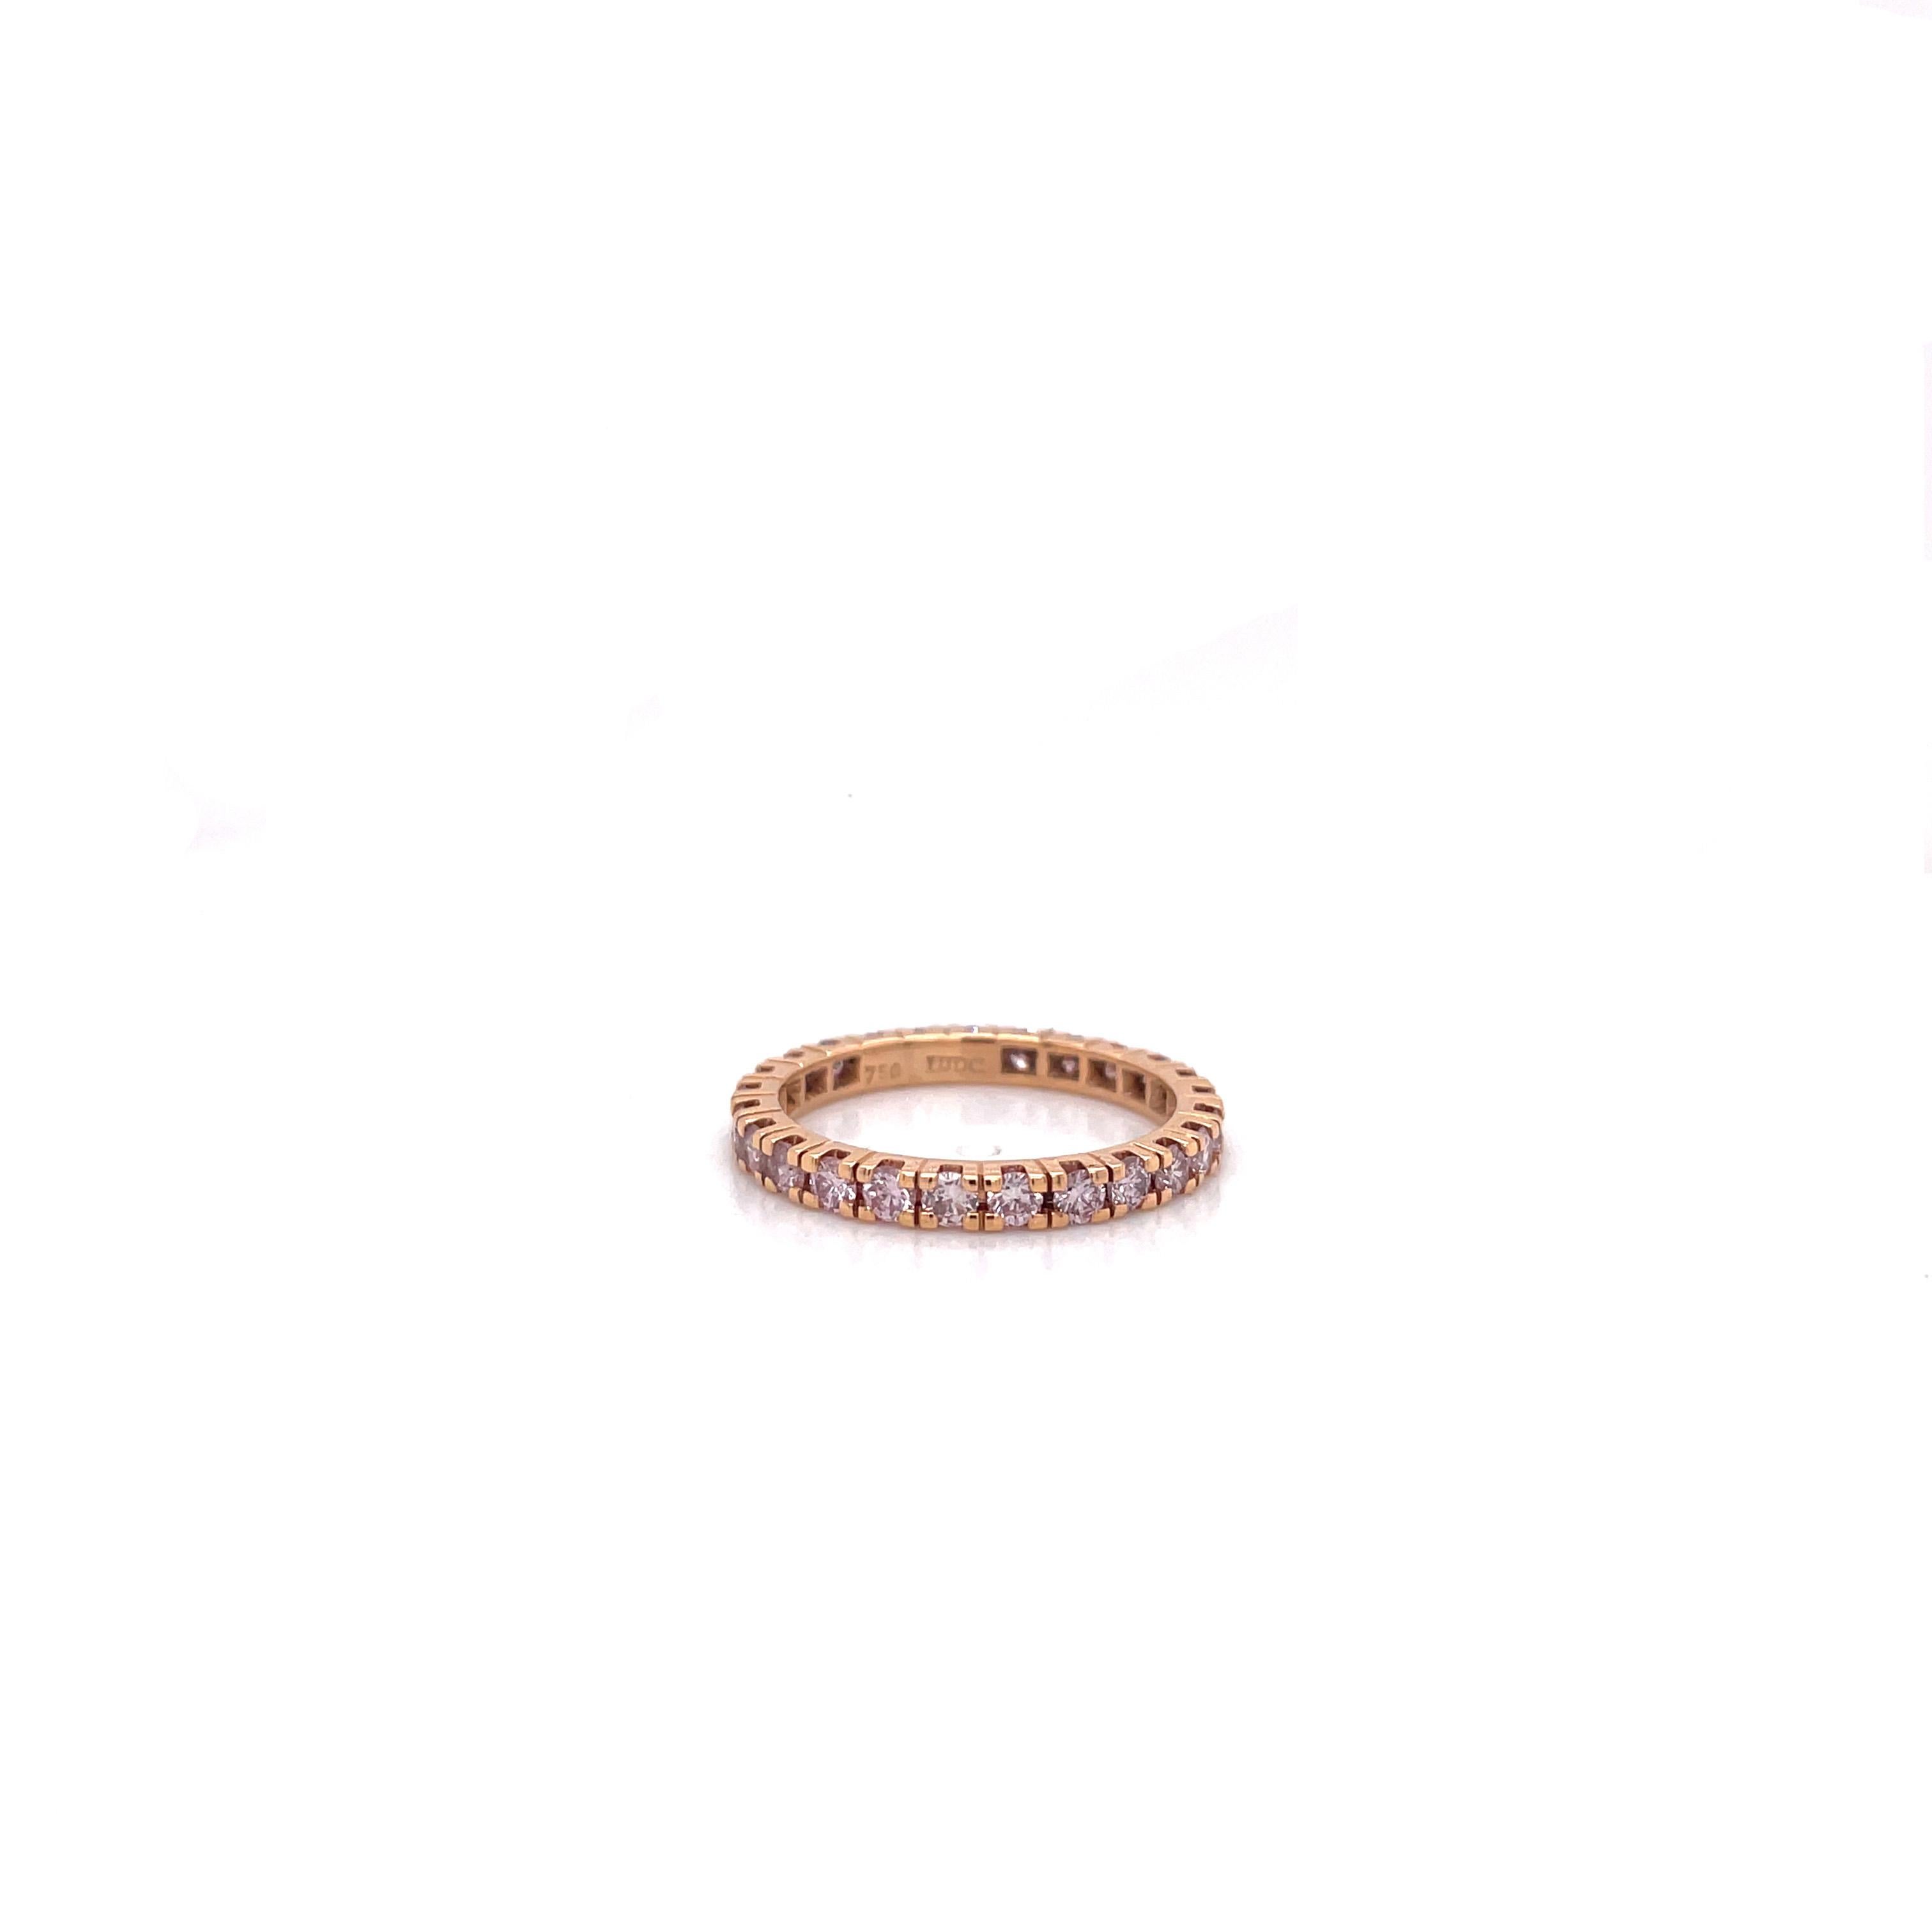 This gorgeous eternity band has a total of 25 Round Pink Diamonds with VS clarity set in 18K Rose Gold. 

Inquiries for additional photos, videos, and requests to see this piece in-person are encouraged.

Metal: 18K Rose Gold
Ring Size: 6.5
Total